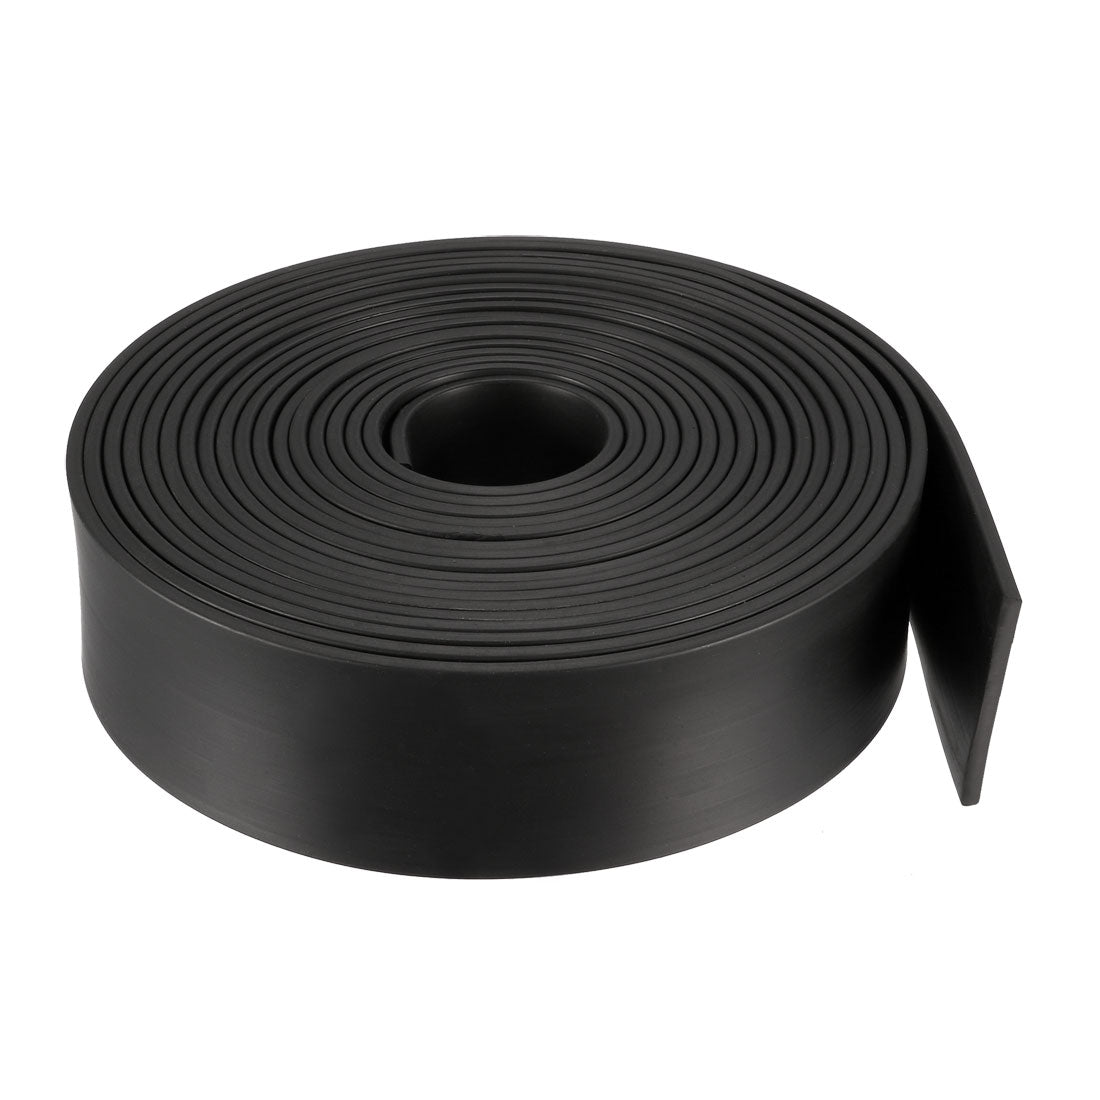 uxcell Uxcell Solid Rectangle Rubber Seal Strip 40mm Wide 3mm Thick, 5 Meters Long Black